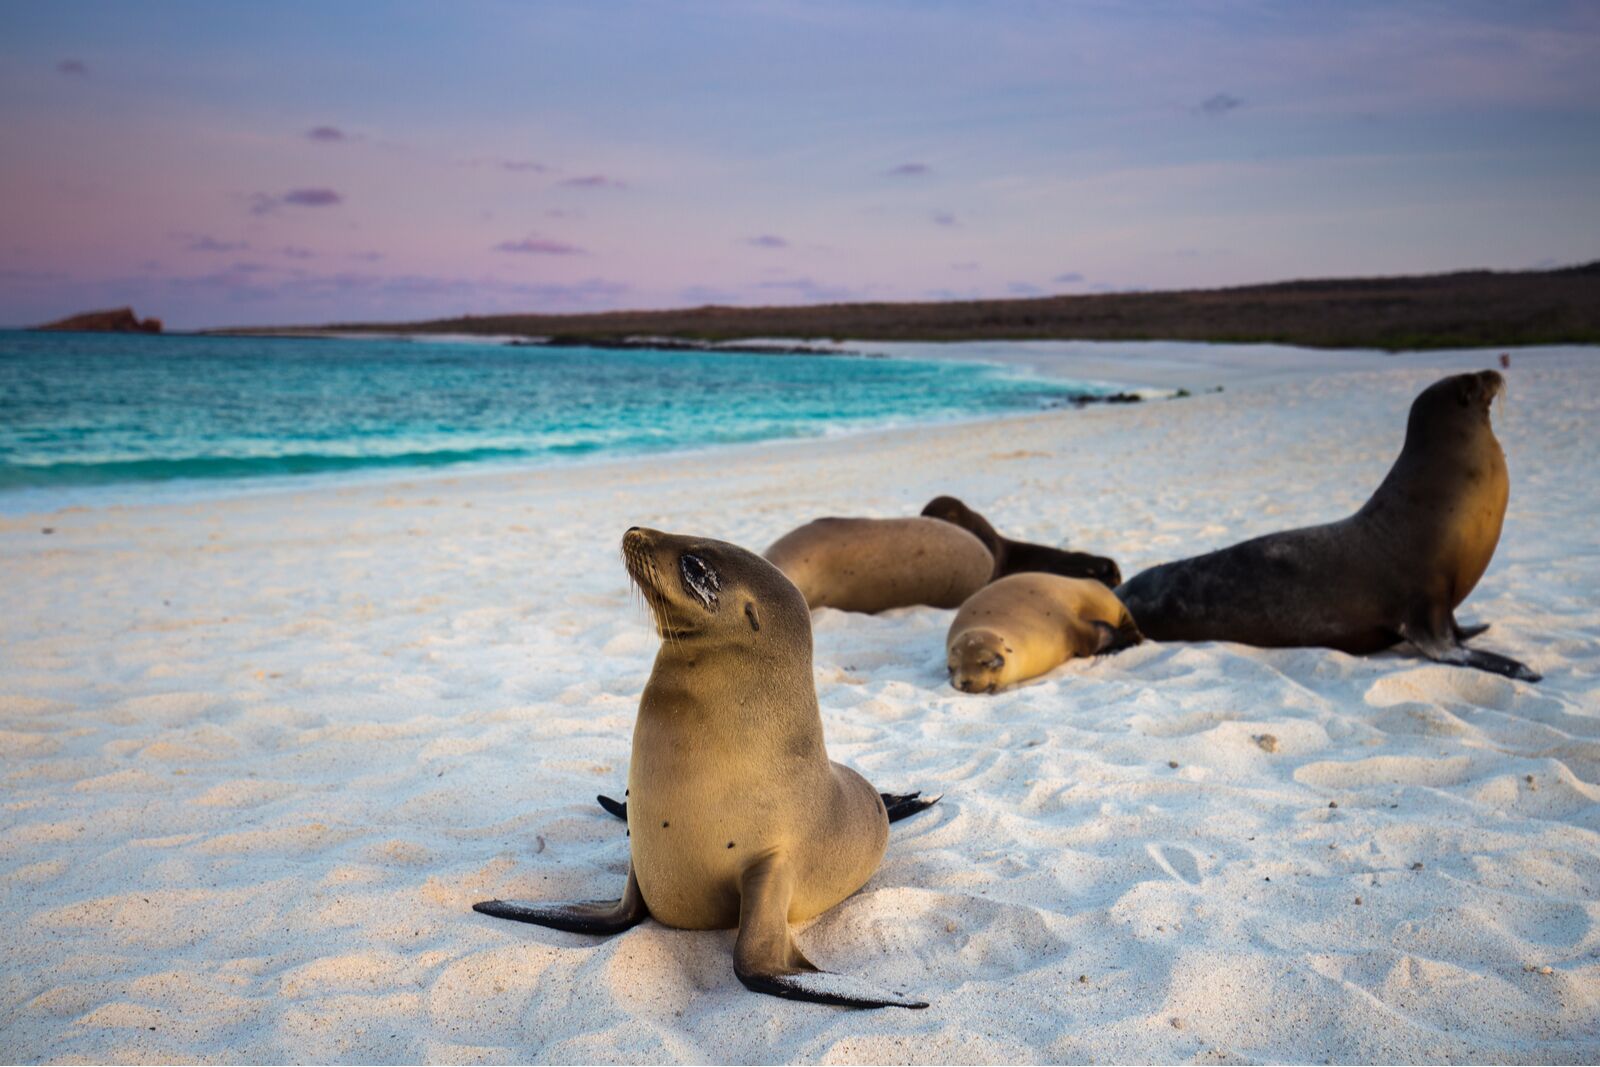 The Galapagos fishing ban will help species like the Galapagos sea lion, seen here 